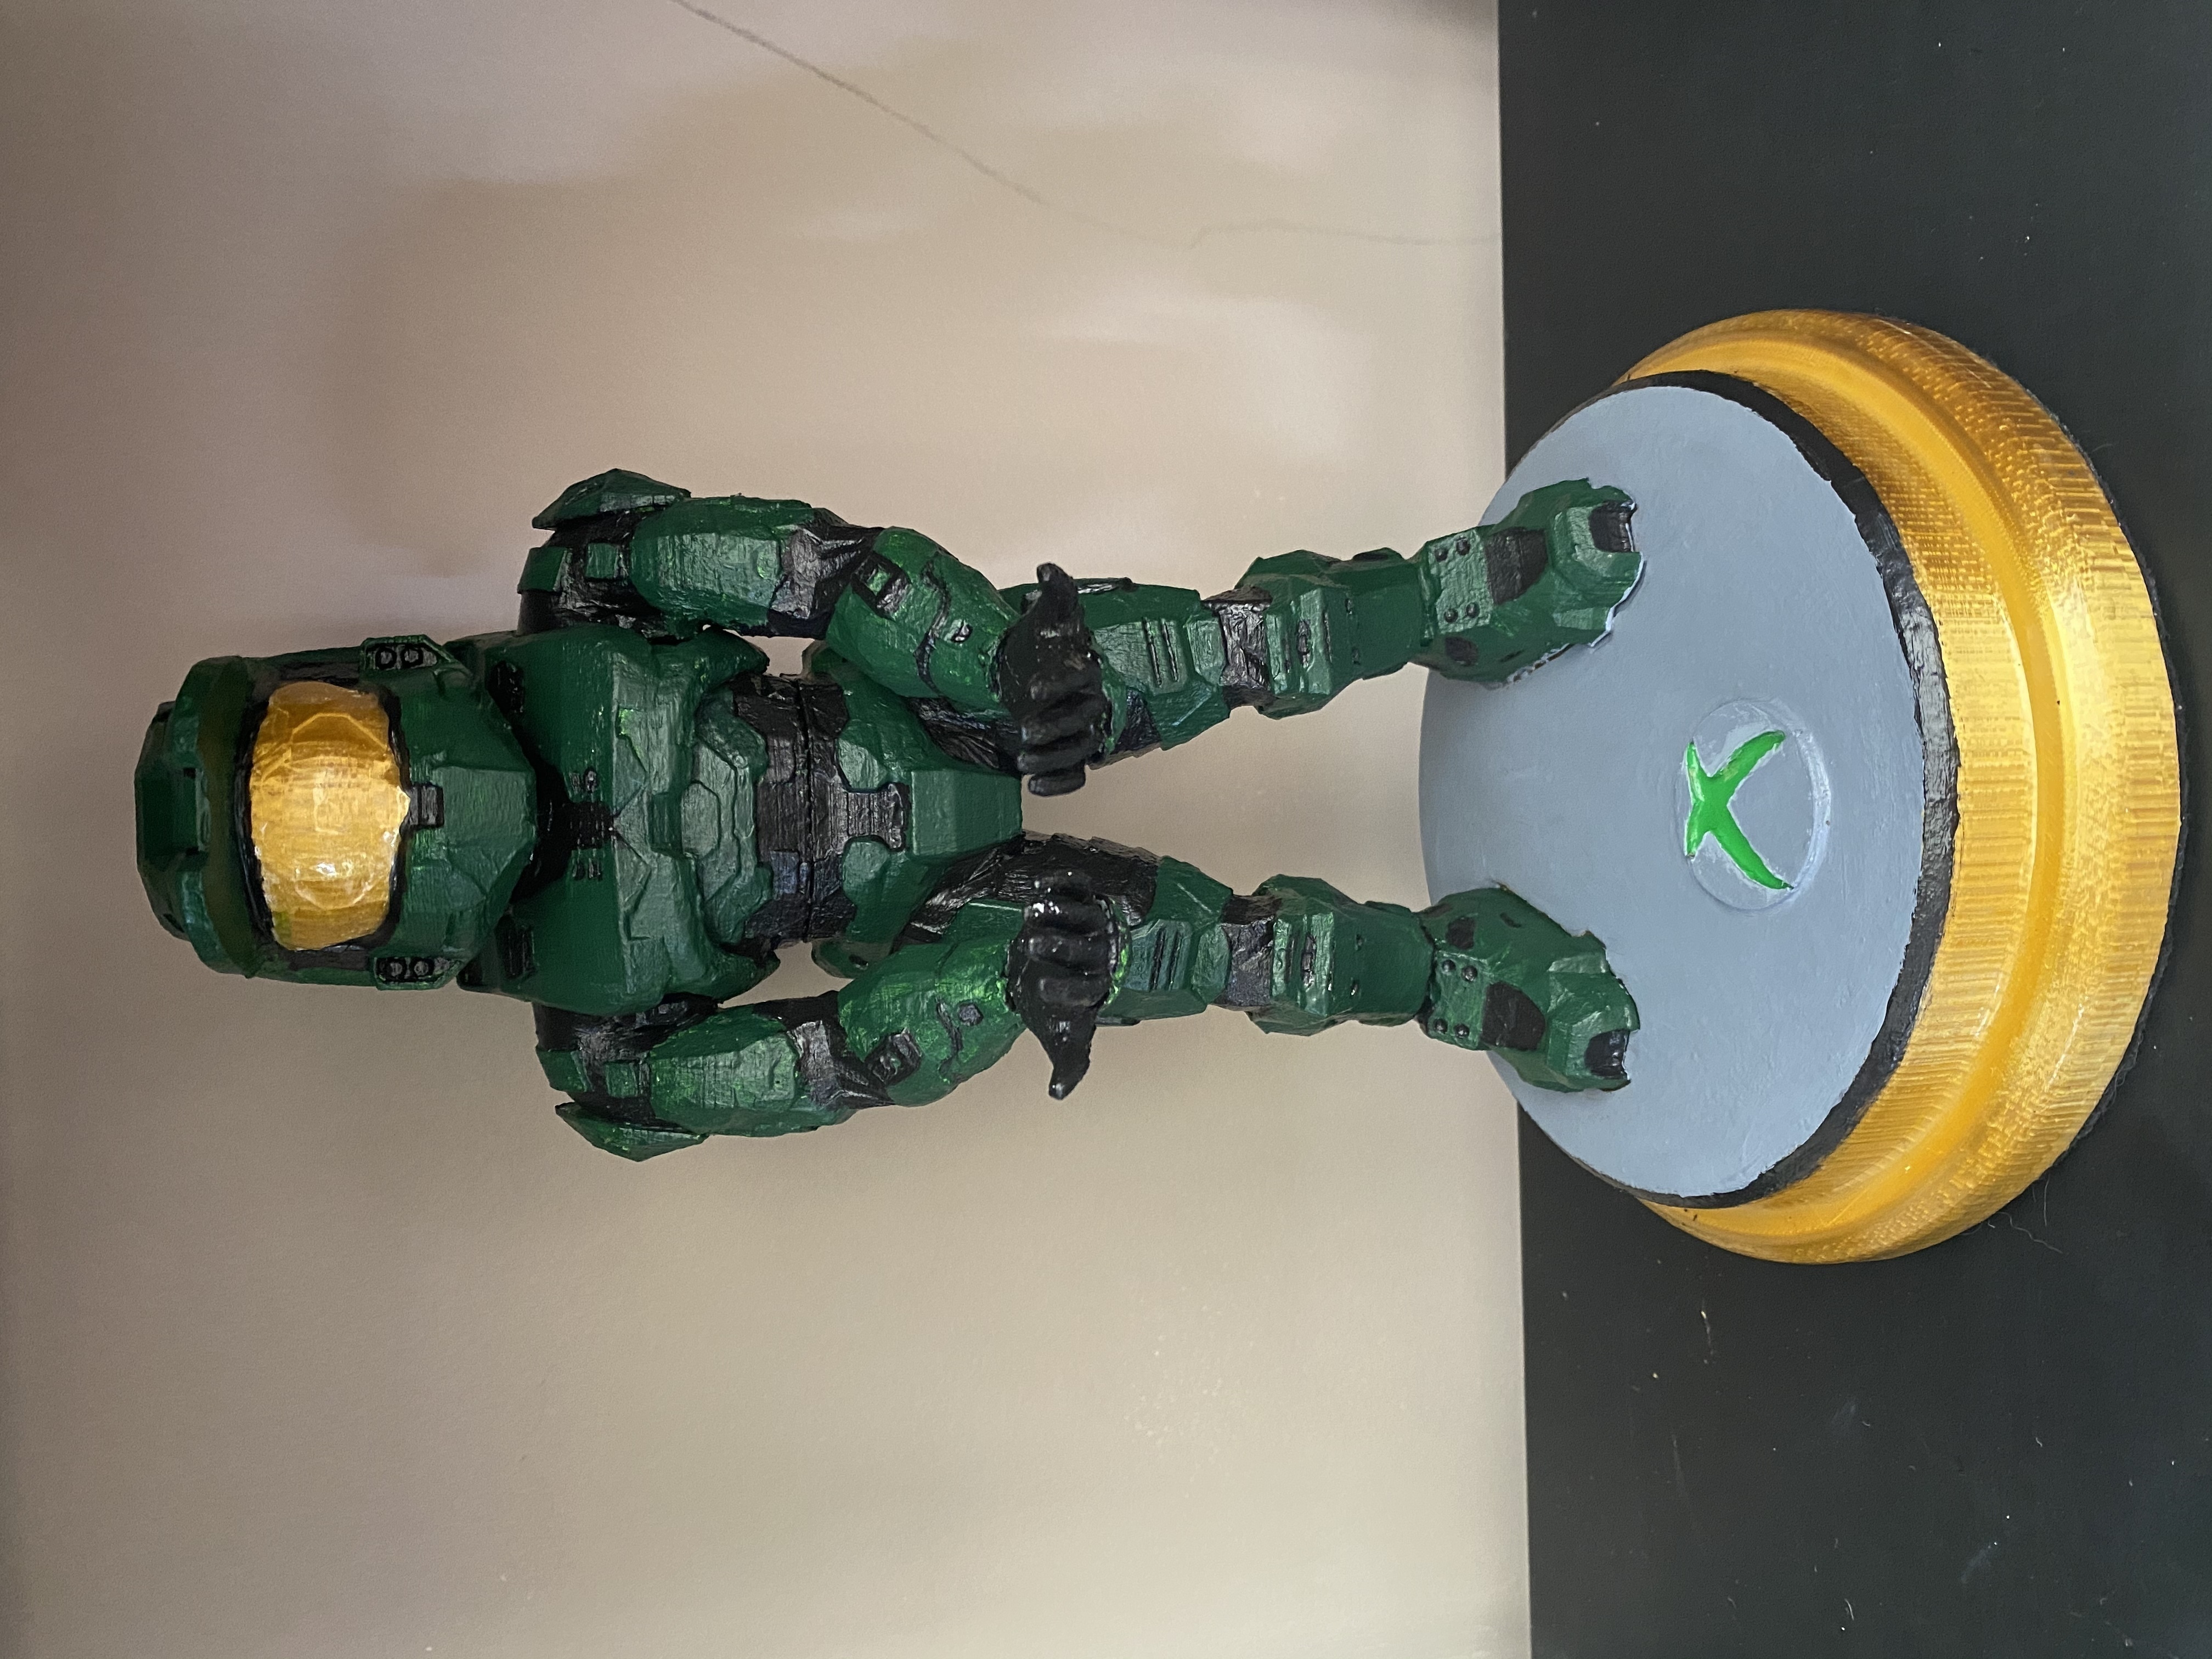 master chief xbox one controller holder